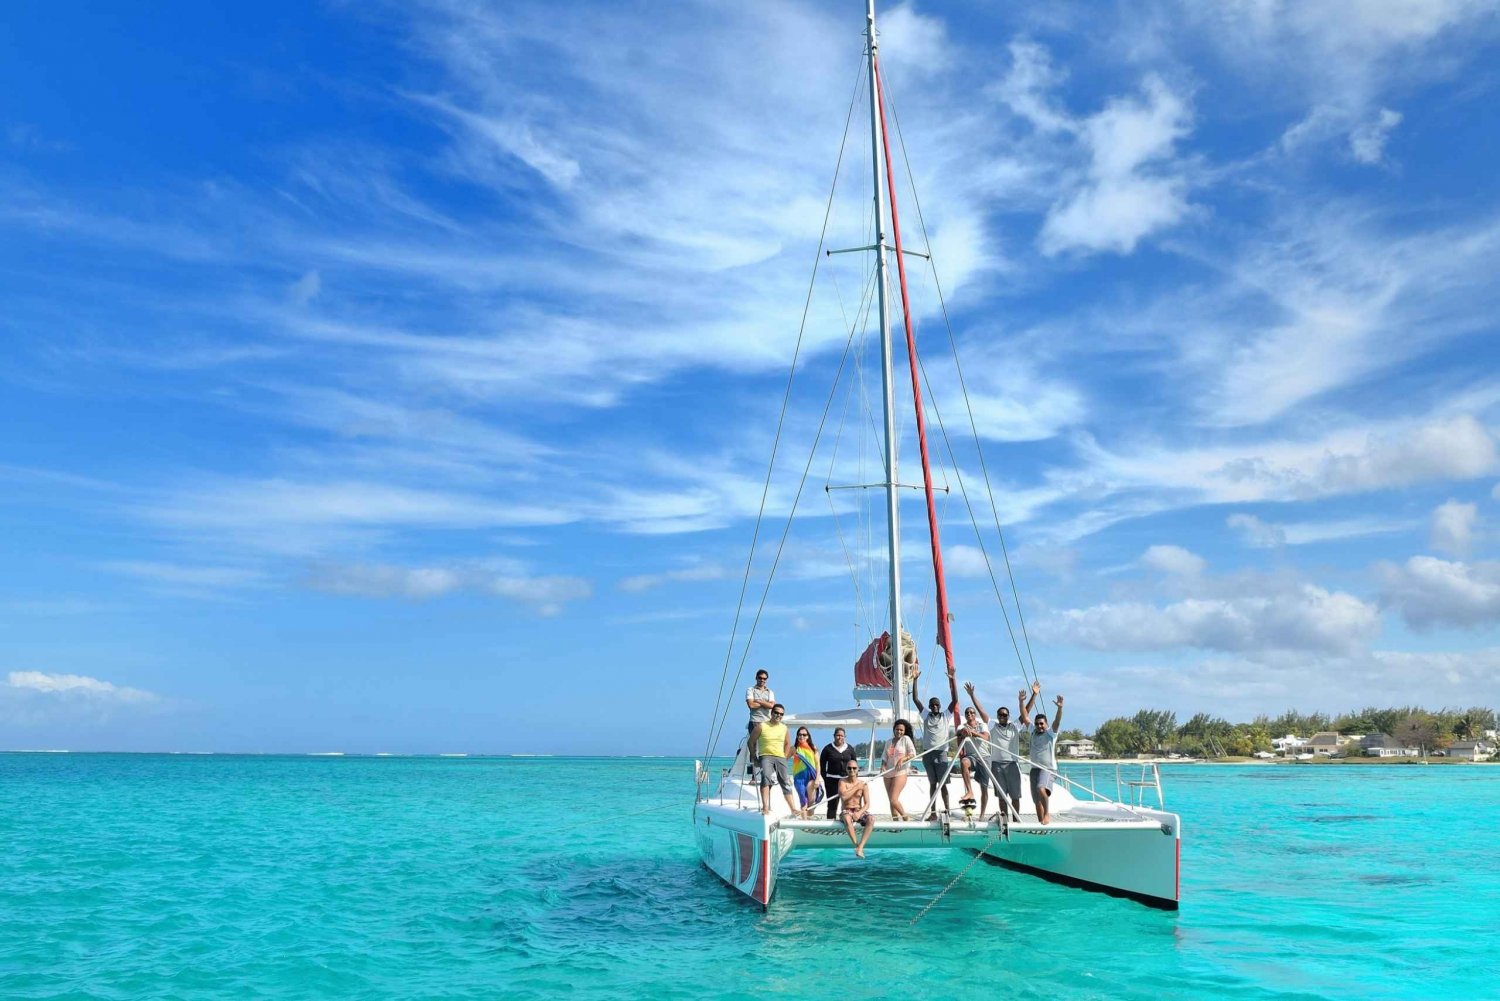 Full-Day Cruise to Ile aux Cerfs with BBQ Lunch Included